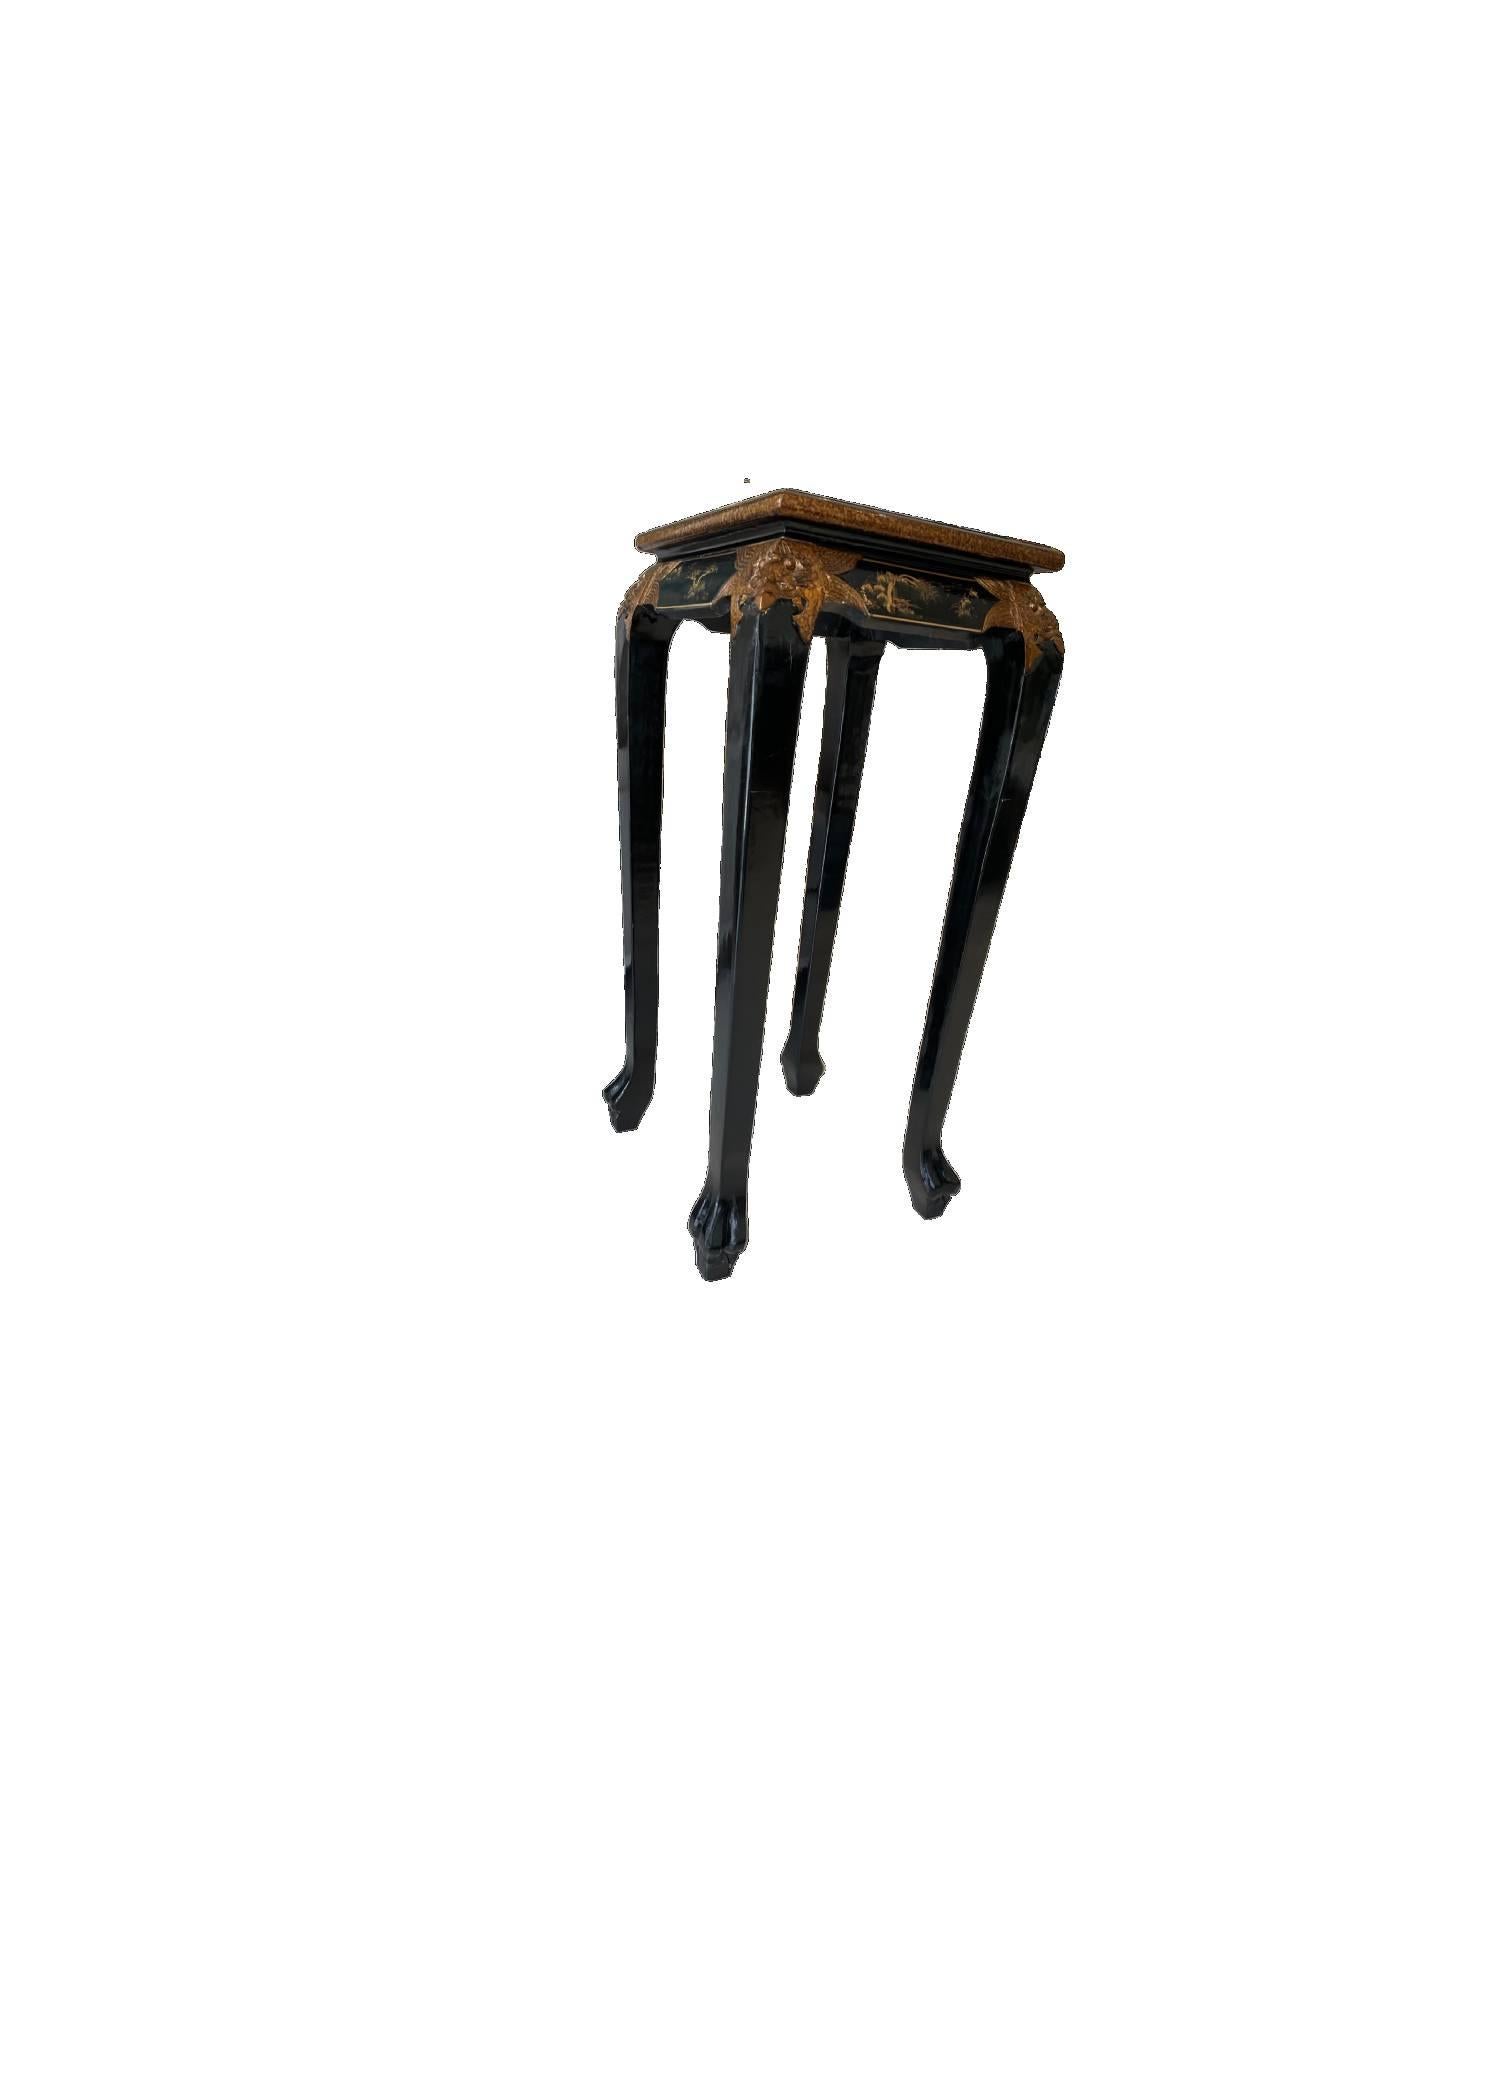 An elegant black lacquered pedestal table with gold trim - to display an “objet d’art” or to use as an elegant plant stand.